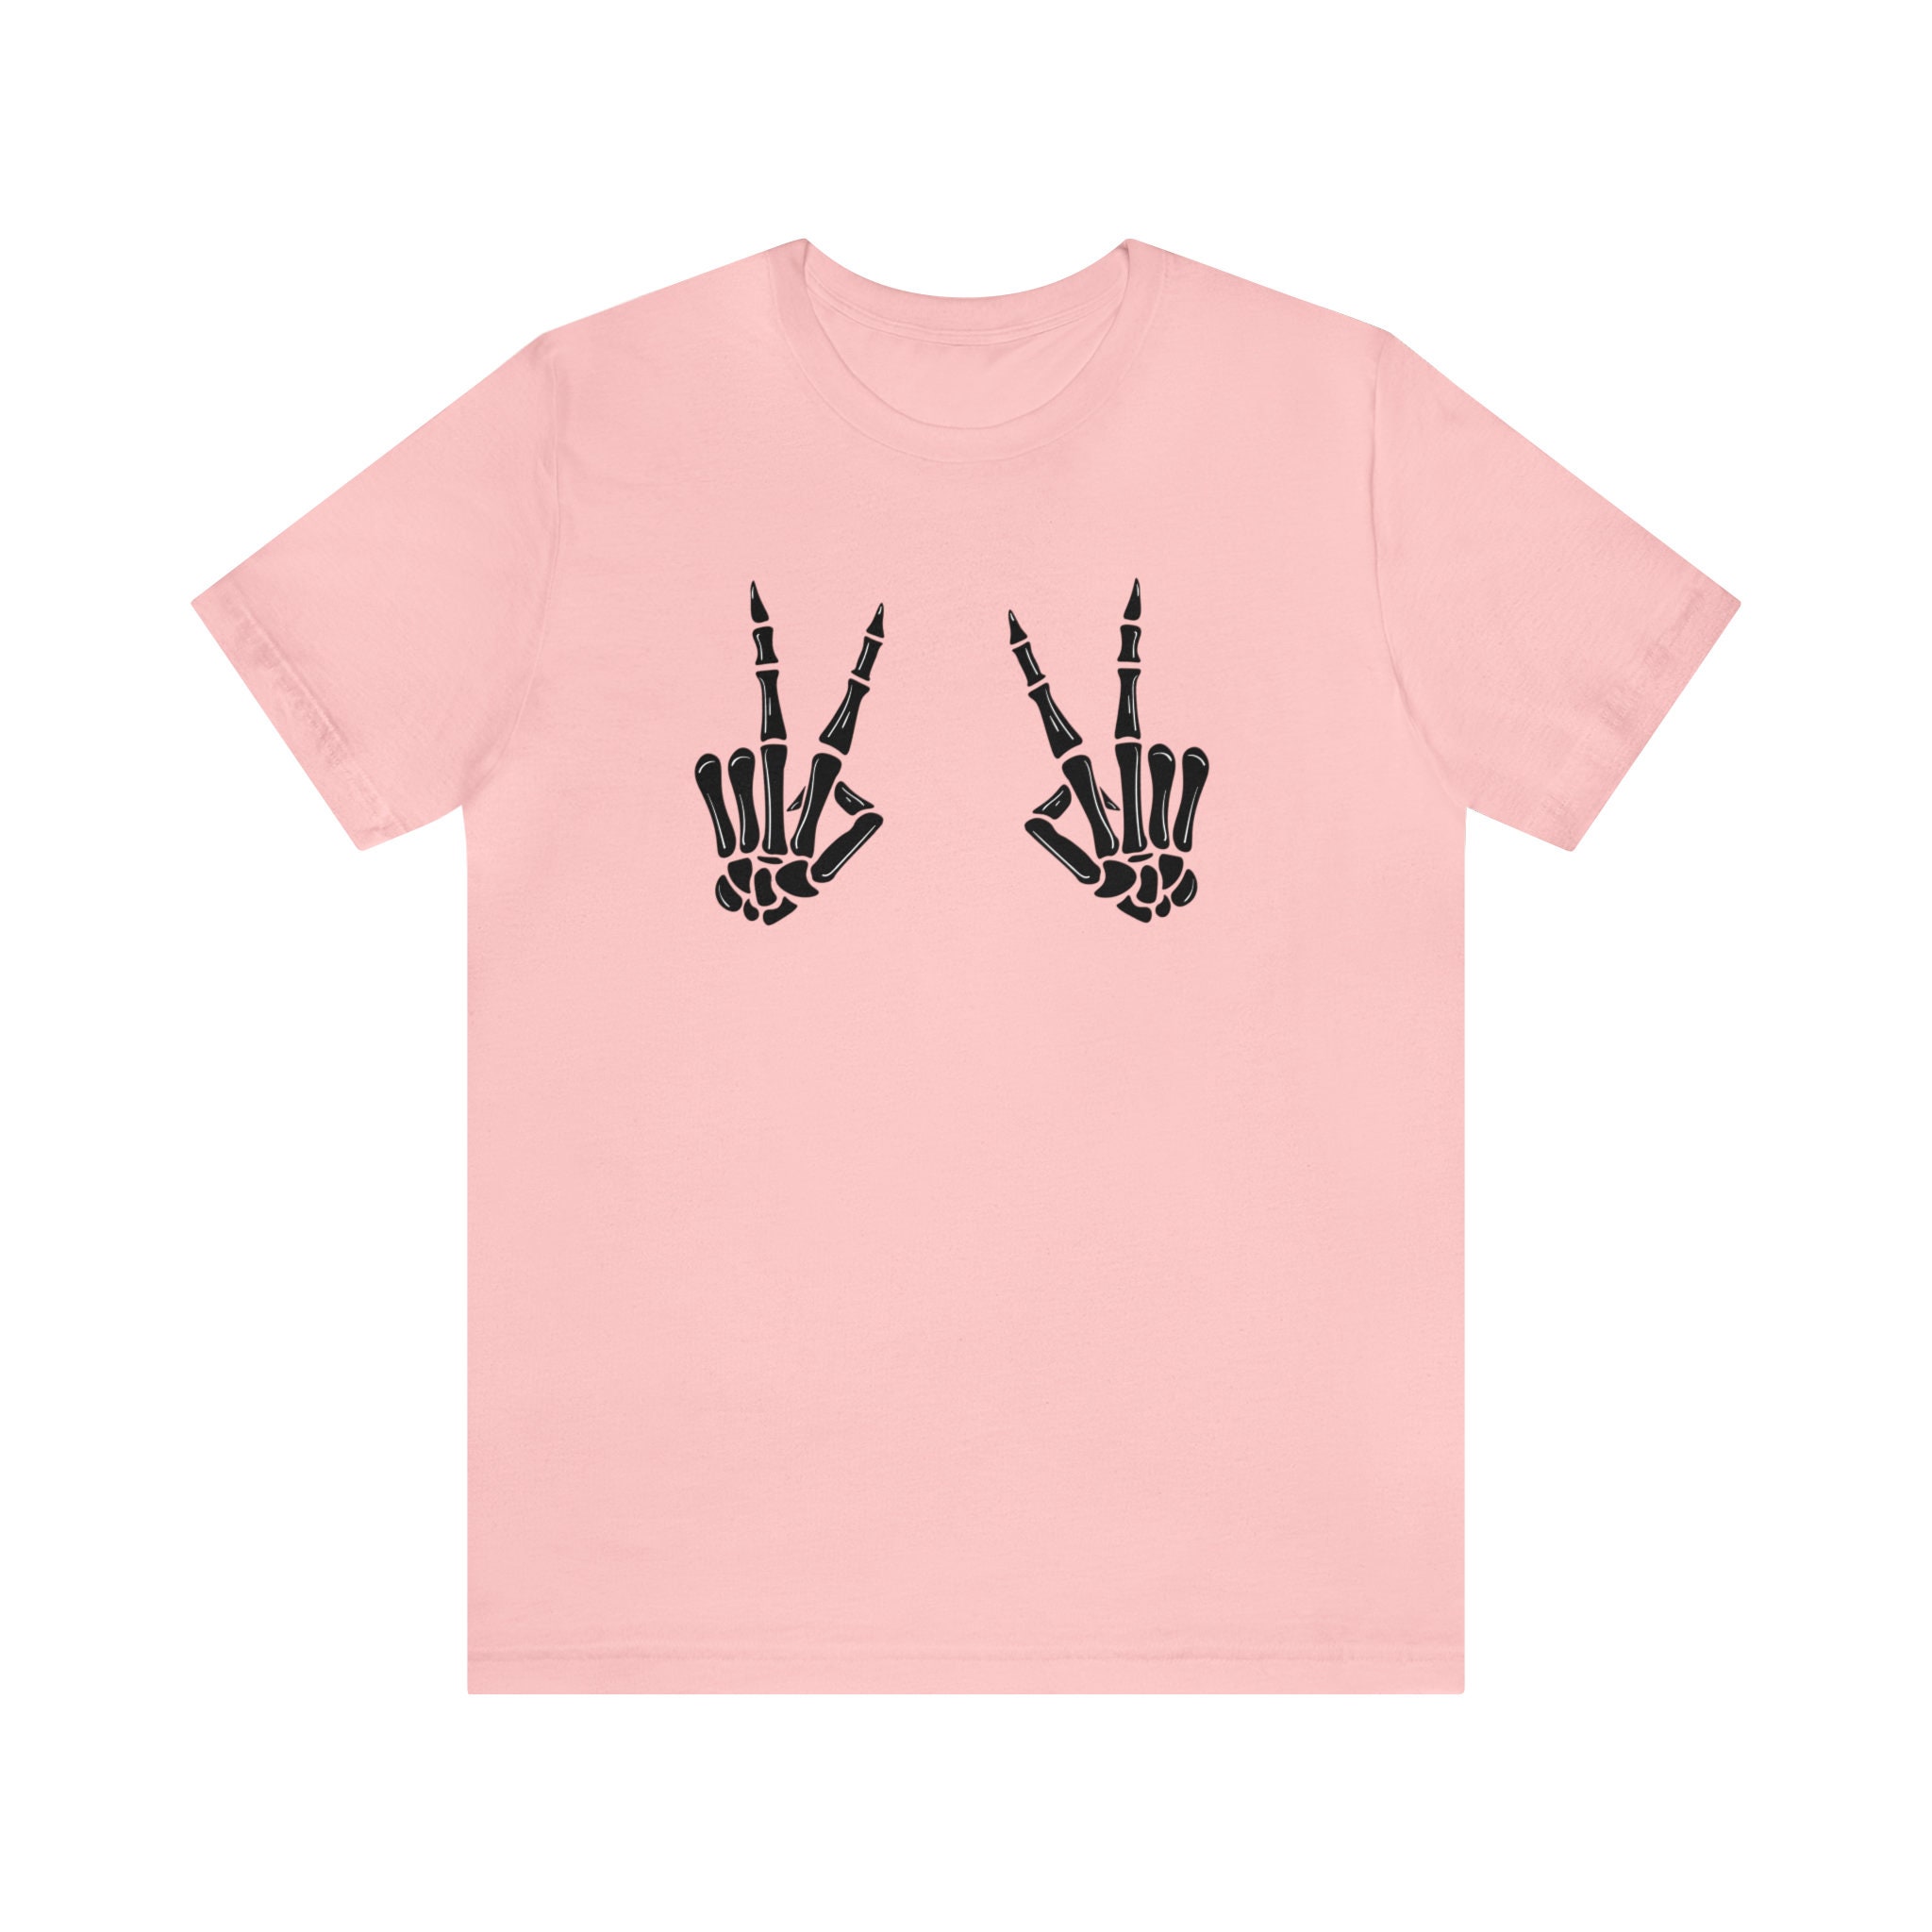 Discover Funny PEACE SIGN HANDS Shirt, Skeleton Hands Shirt, Skeleton Shirt, Peace Hand Shirt, Halloween Skeleton Shirt, Funny Shirt